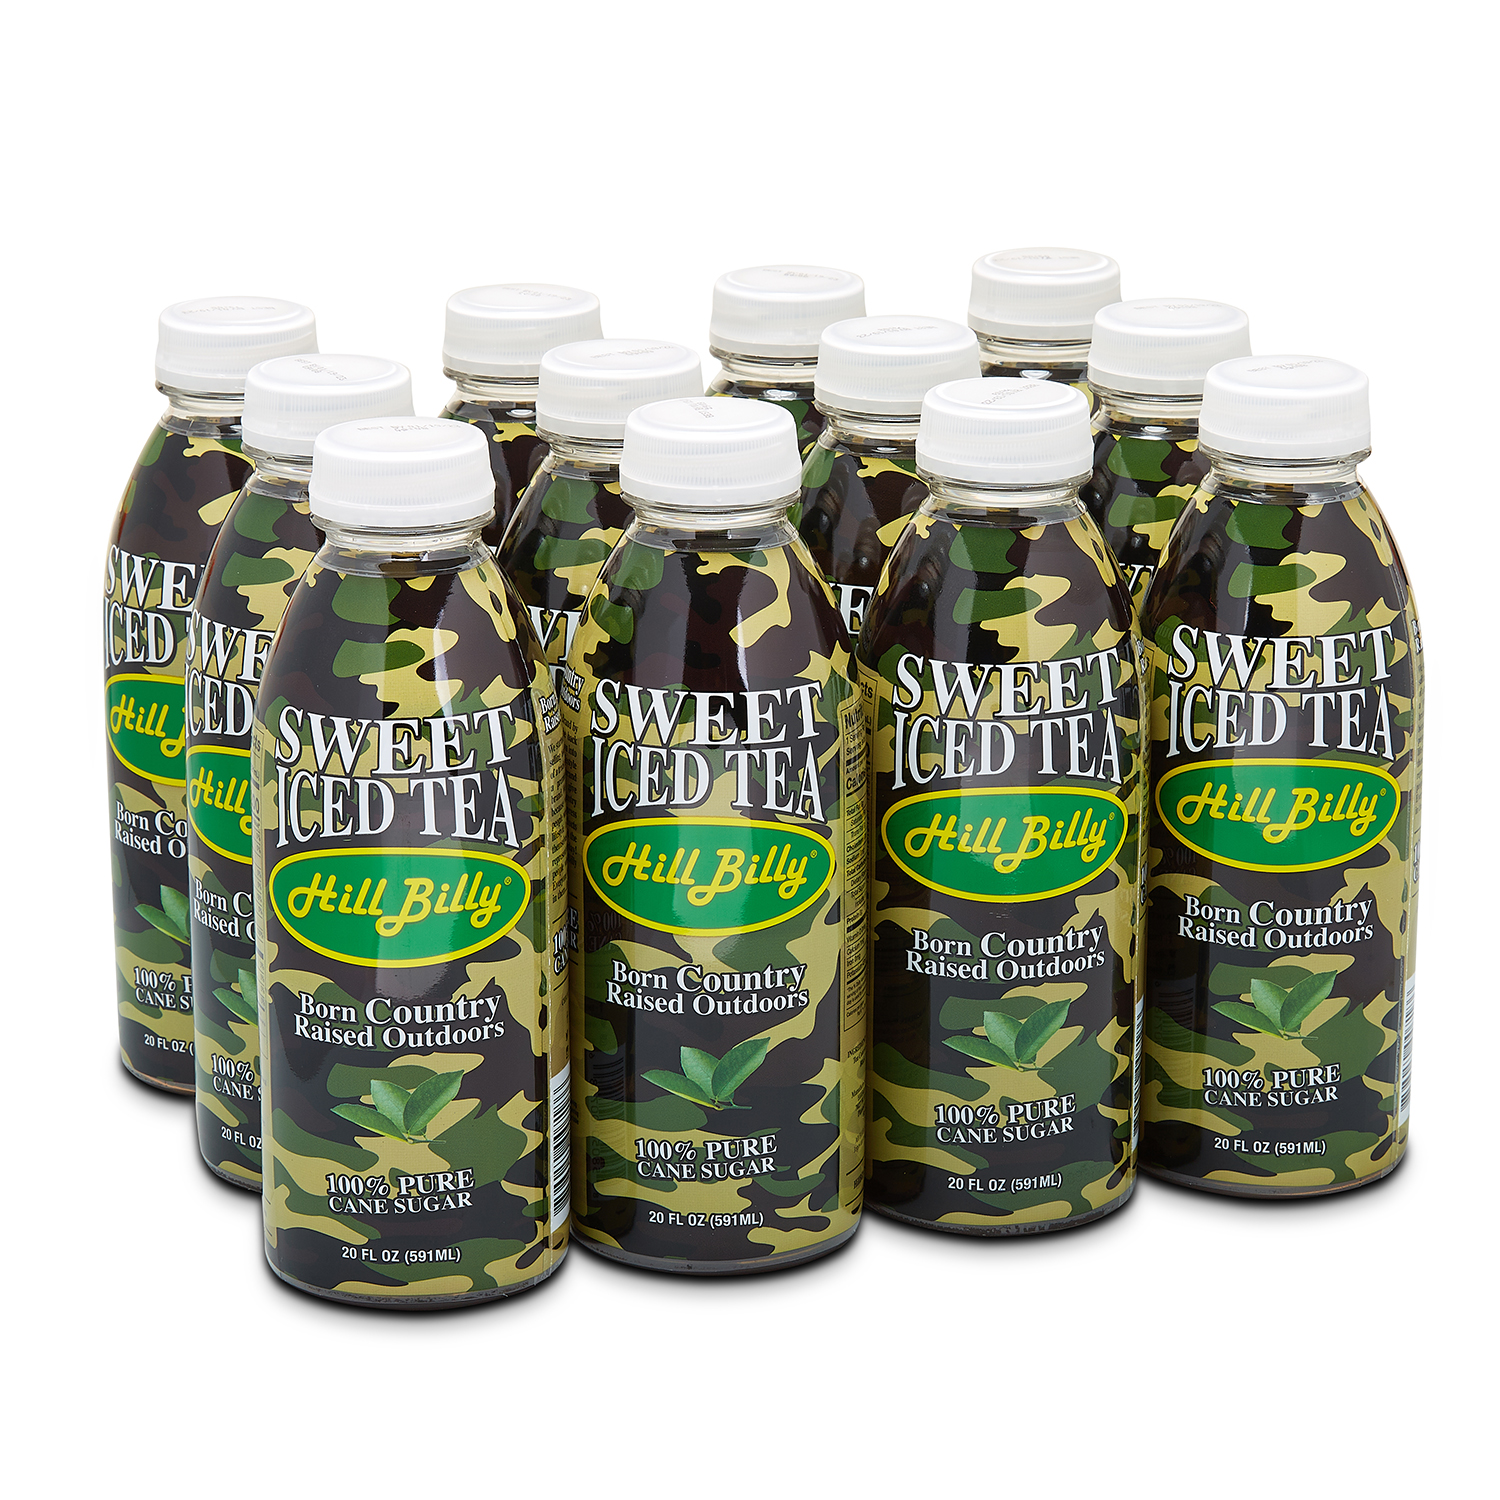 Sweet Iced Tea - Hill Billy Beverages